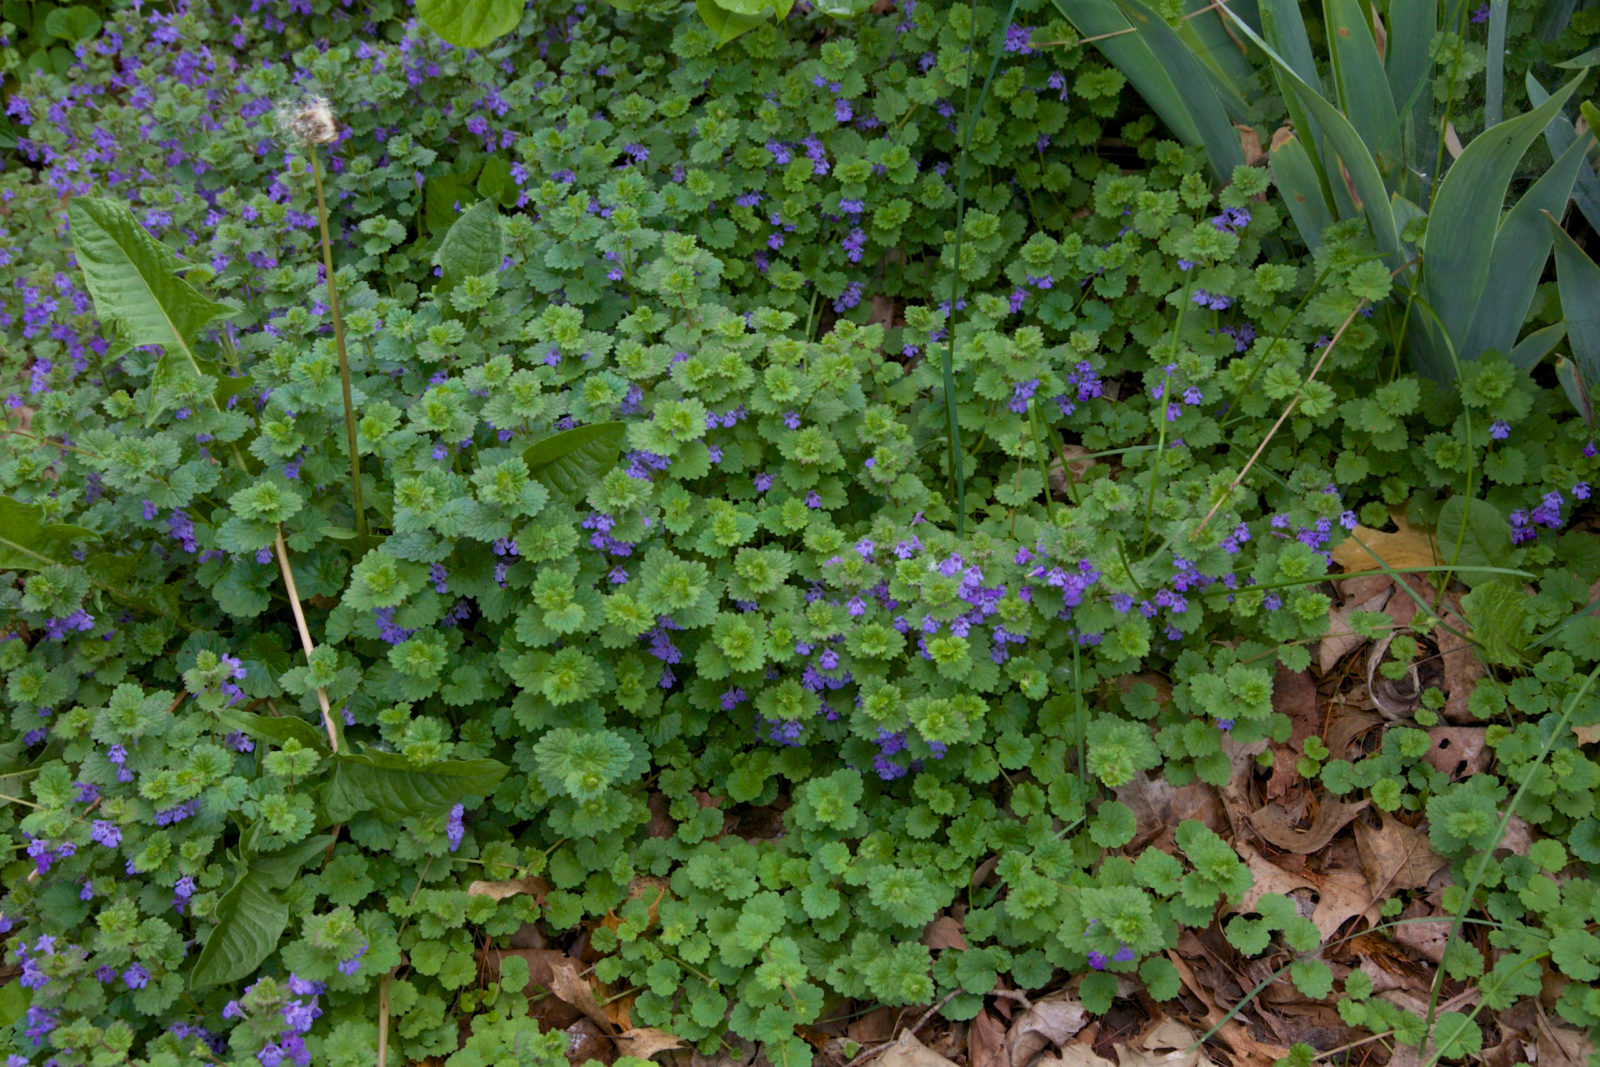 Ground Ivy weed